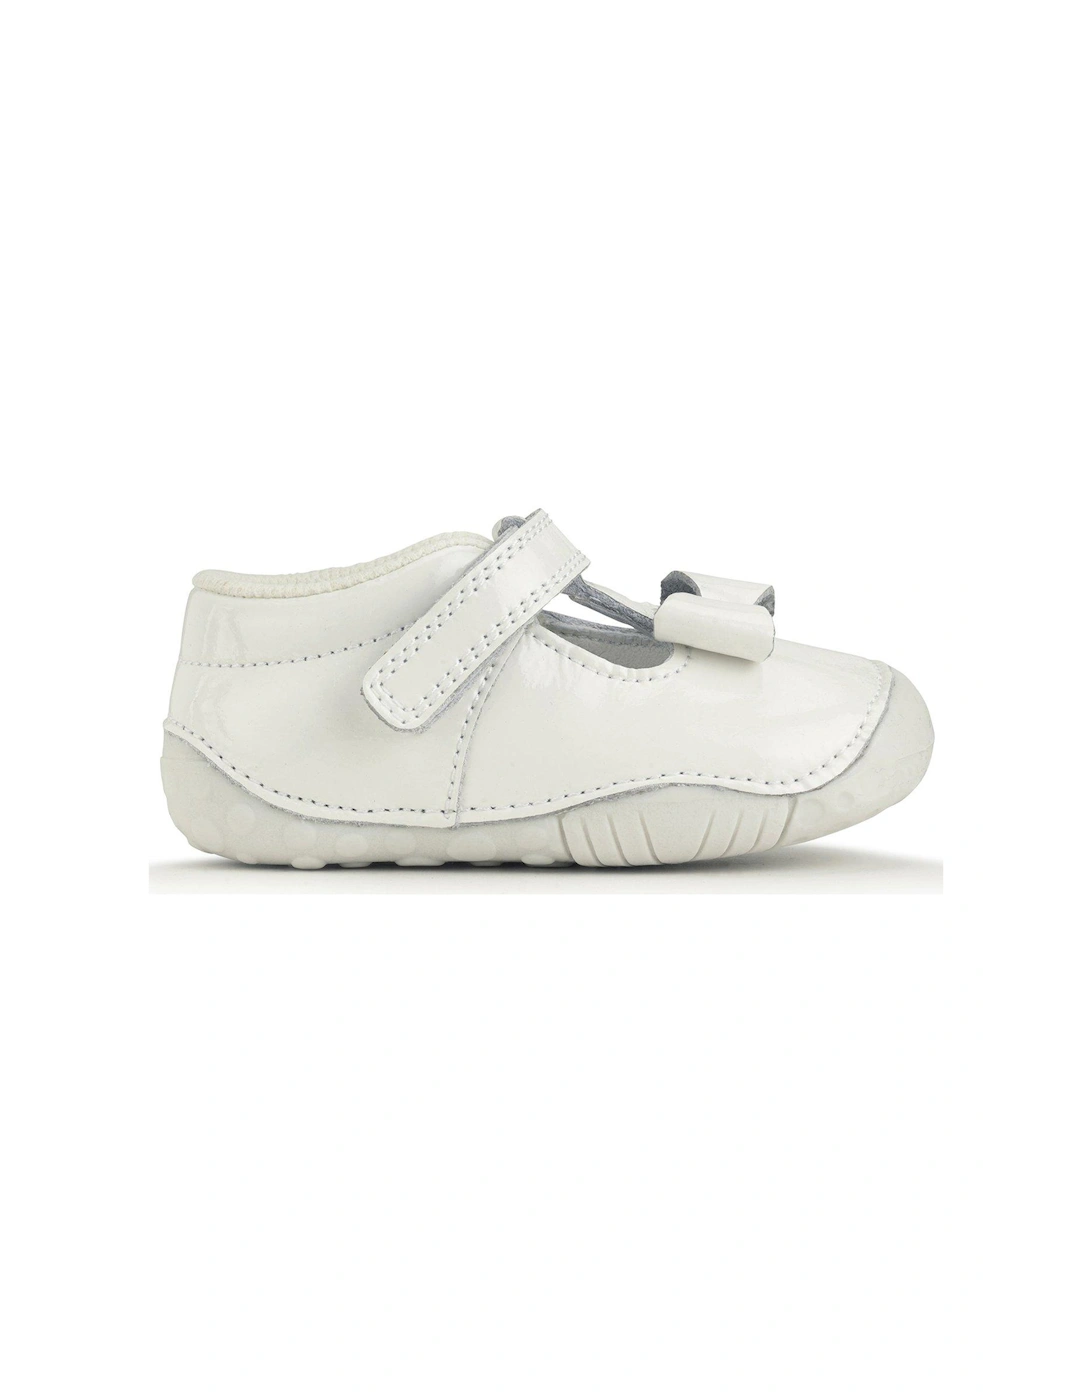 Wiggle Soft White Leather Pre Walker Baby Shoes, 2 of 1